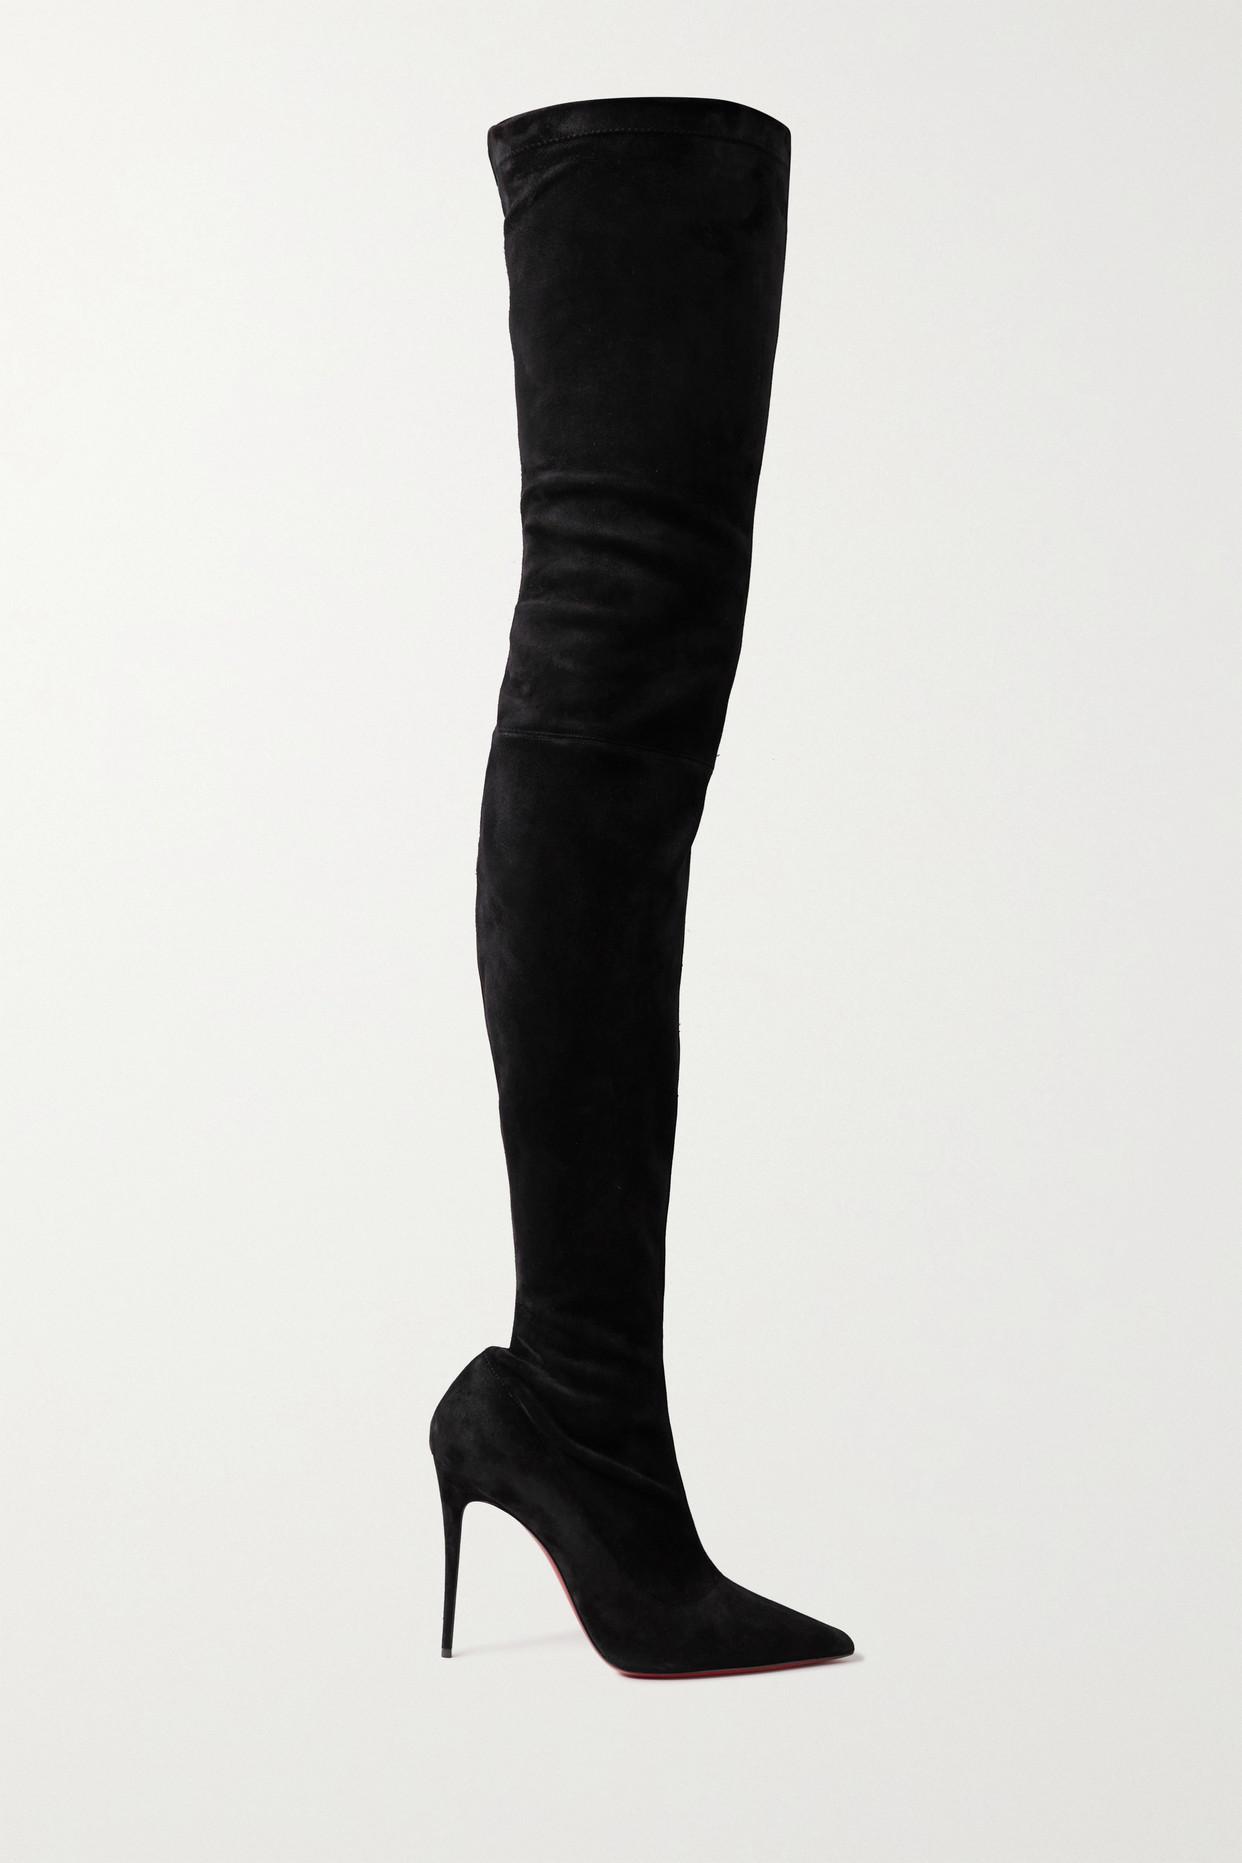 Christian Louboutin Kate Botta Alta Stretch-suede Over-the-knee Boots ...